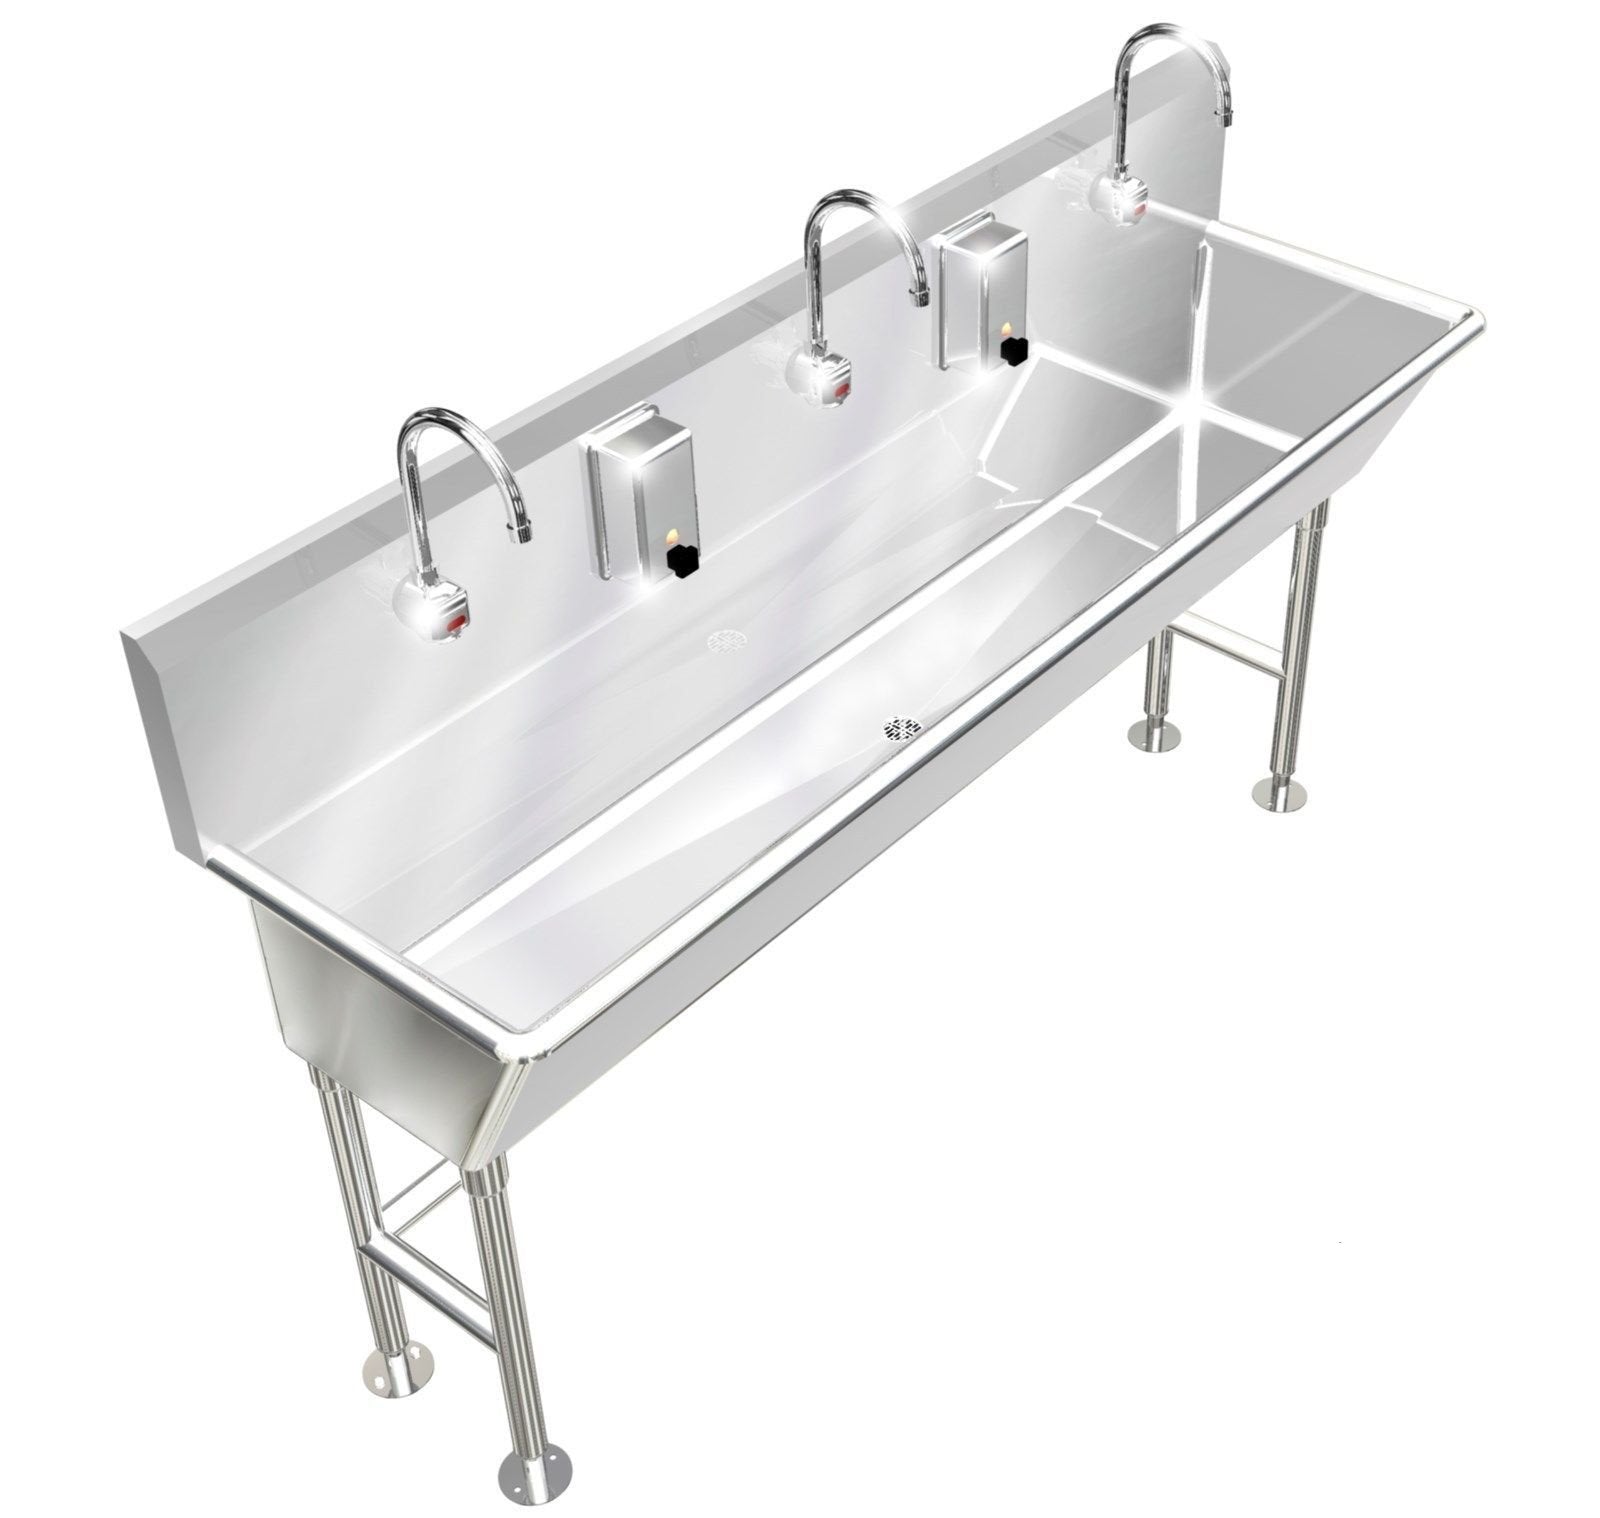 HAND WASH SINK 3 STATION 72"L 12" BOWL DEEP ELECTRONIC FAUCET FREE STANDING - Best Sheet Metal, Inc. 